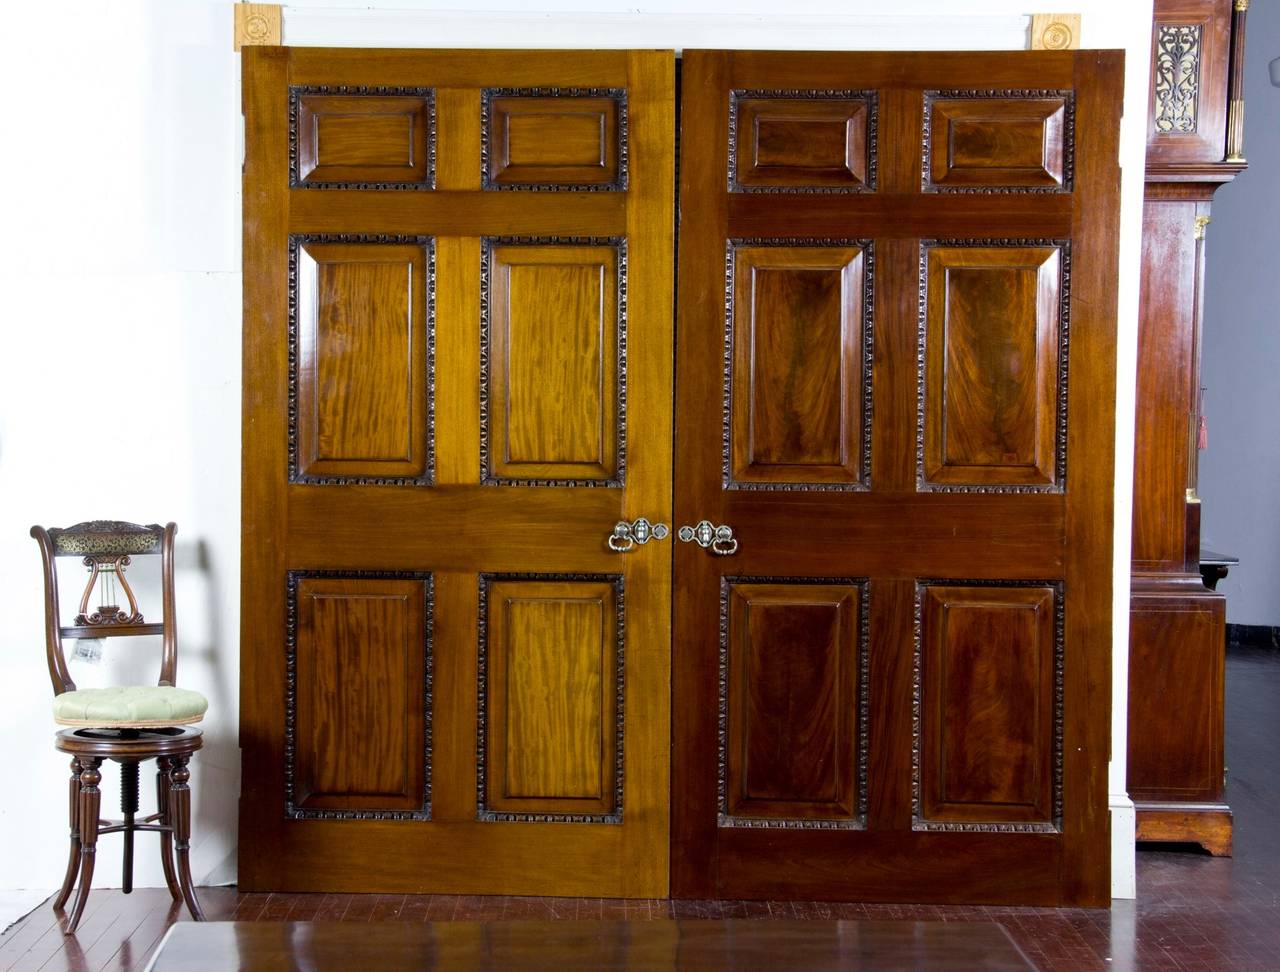 This is a pair of large and very heavy doors which are paneled on both sides. They are 2 ¼ in. thick and require two men to lift and move. These doors are crafted like furniture and are through-tenoned (see detail) literally to last for life. The